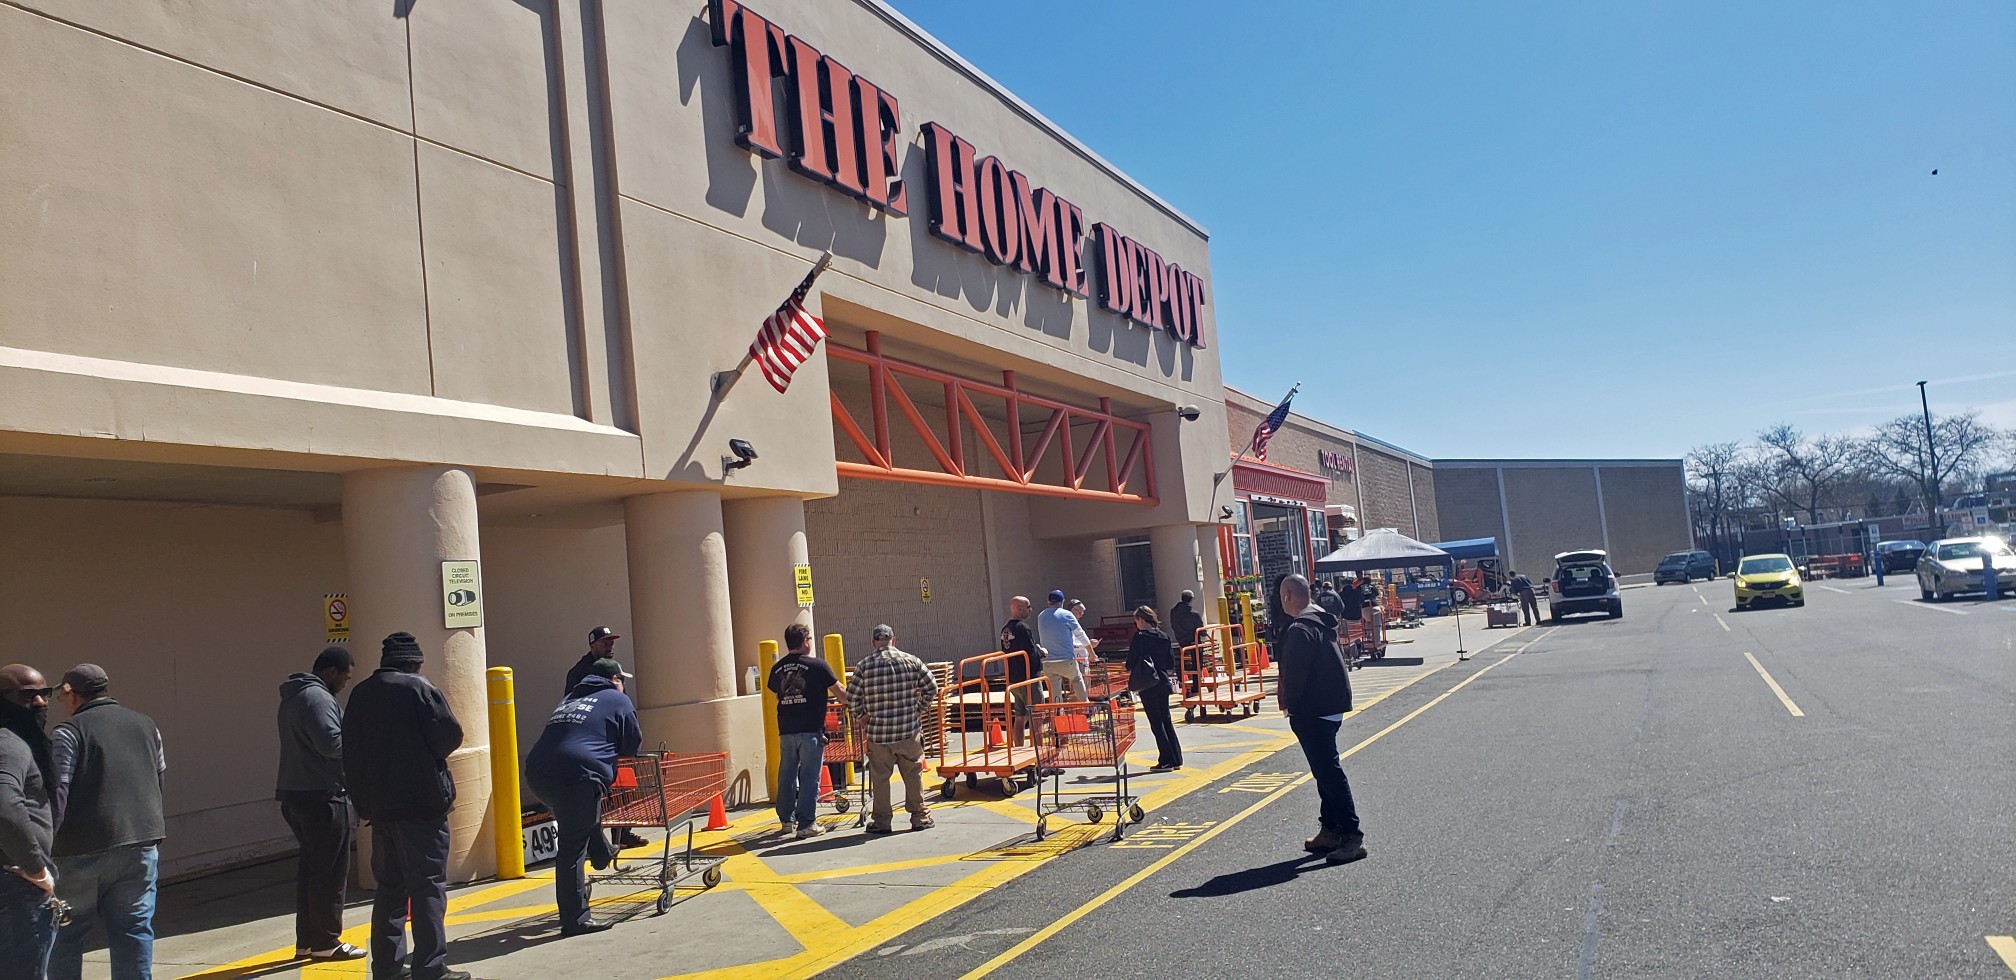 People In Line Waiting To Get Inside Home Depot Because Of The Lock Down From The Corona Virus Some T20 YnX8jp 